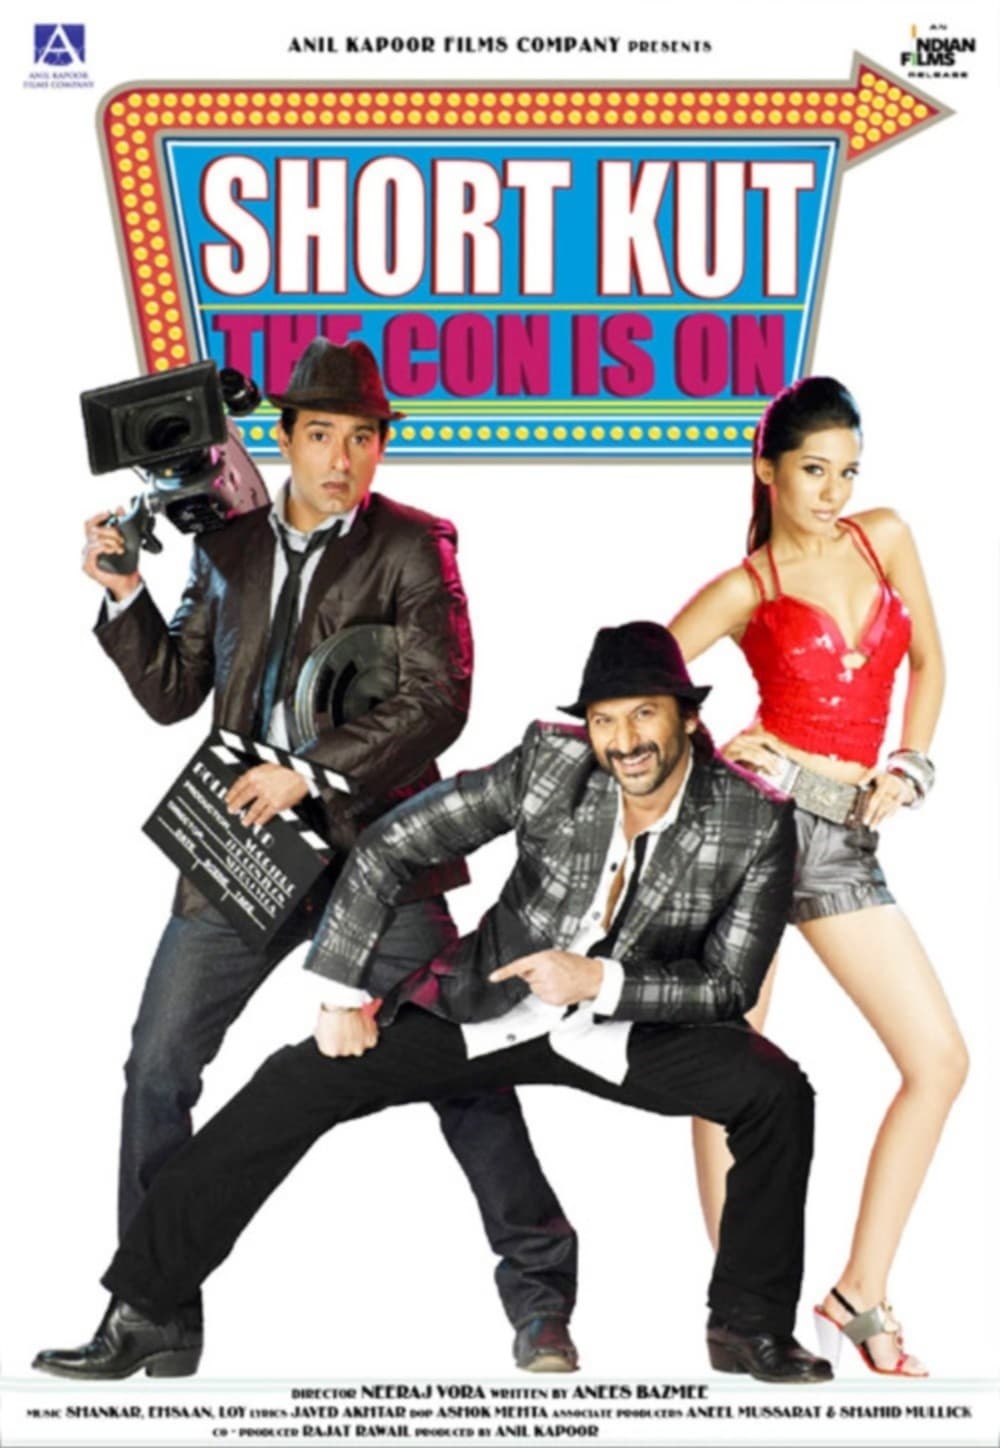 Poster for the movie "Shortkut - The Con Is On"